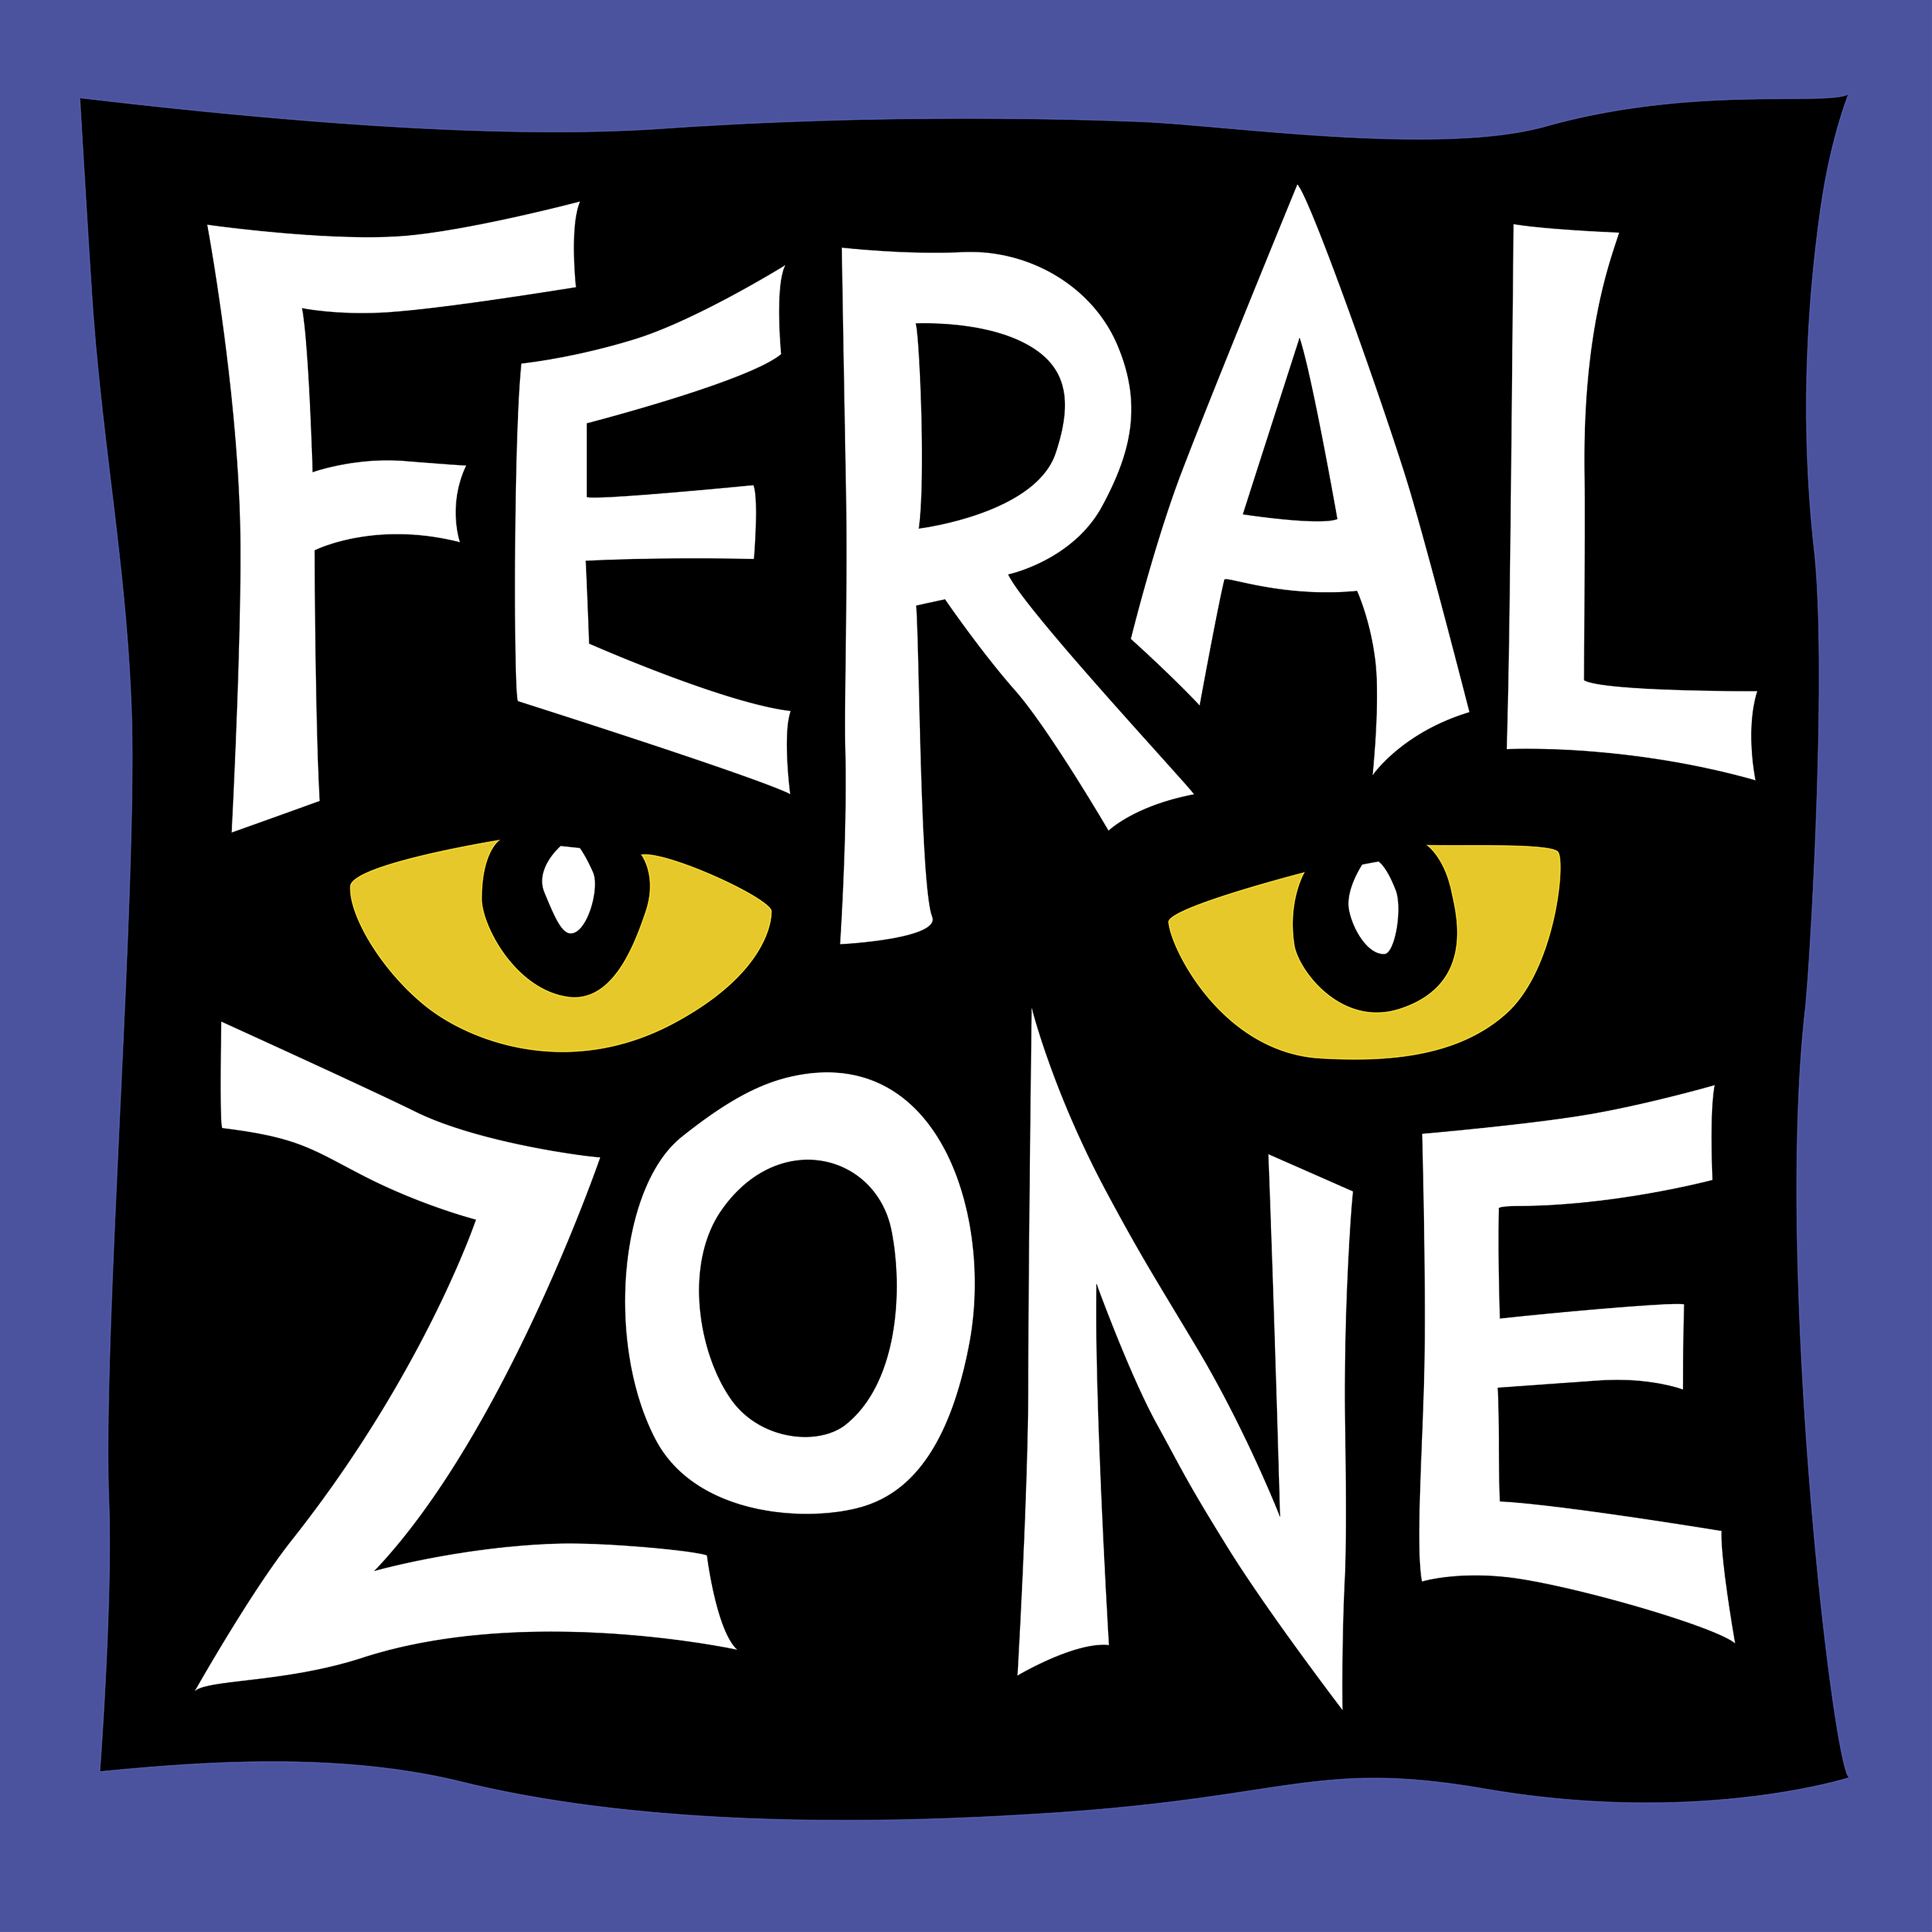 Feral Zone11: BIG CHIEF MONK BOUDREAUX, MARDI GRAS INDIAN CHIEF OF CHIEFS